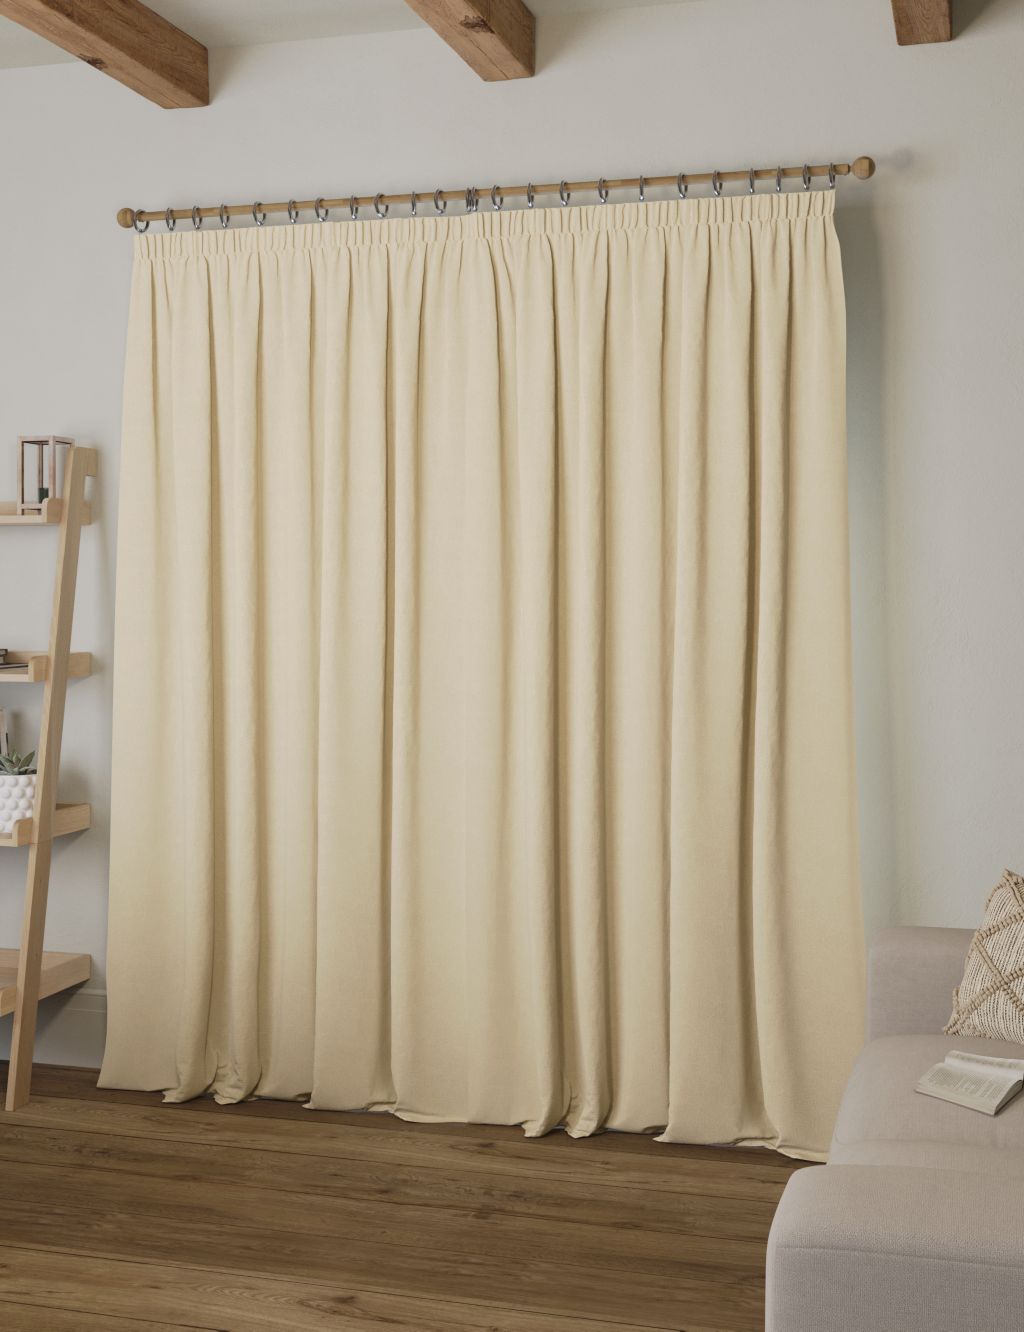 Brushed Pencil Pleat Blackout Thermal Curtains image 4